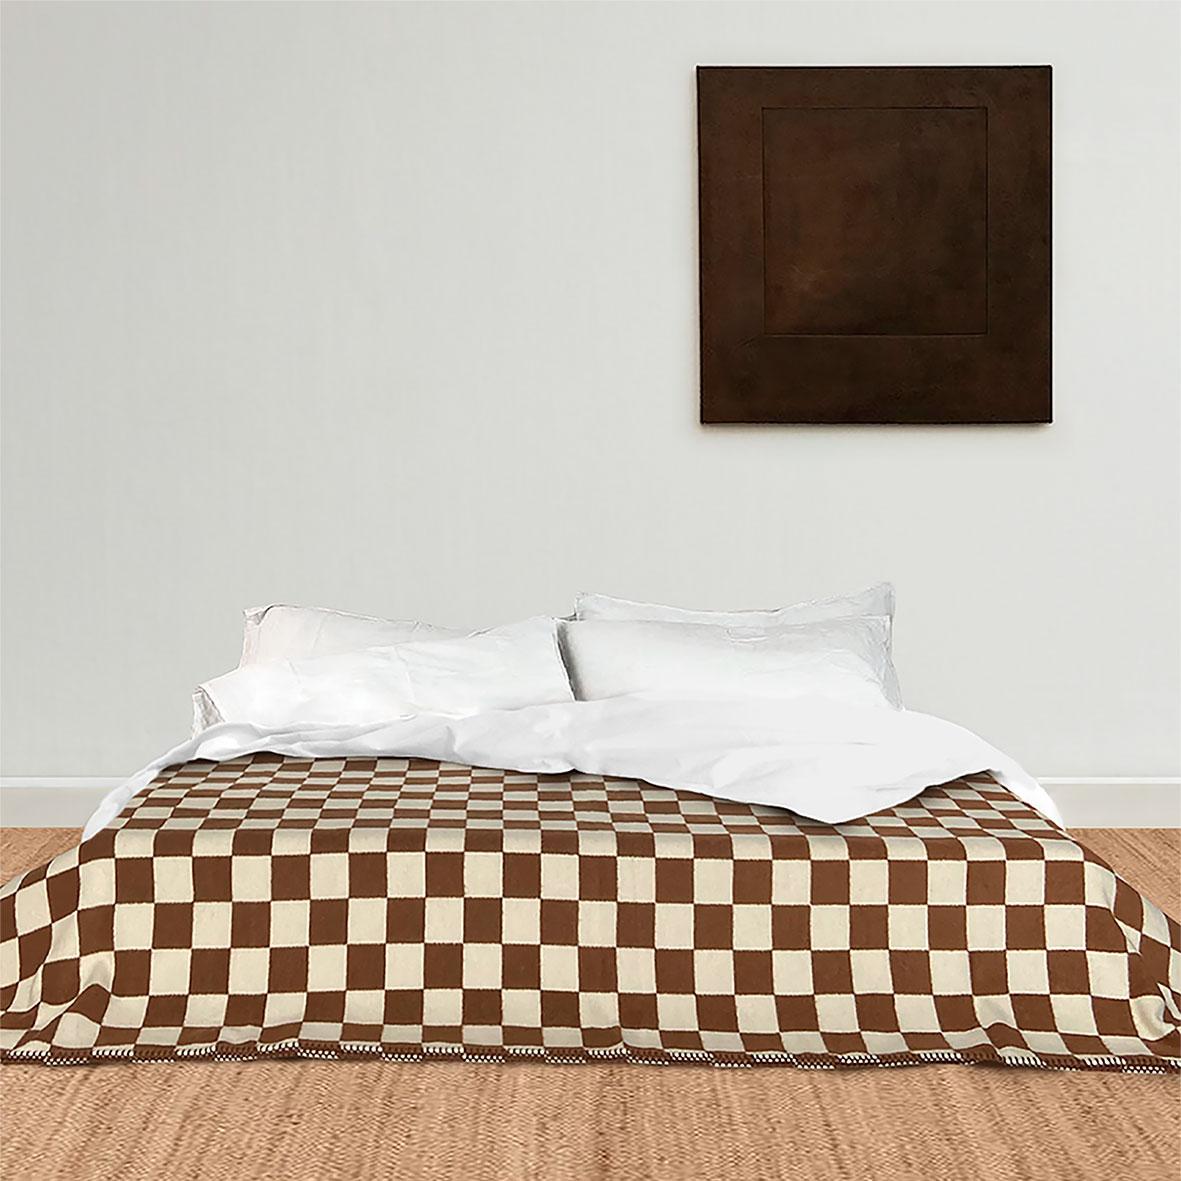 British Sona Checkerboard Brown Recycled Cotton Throw For Sale